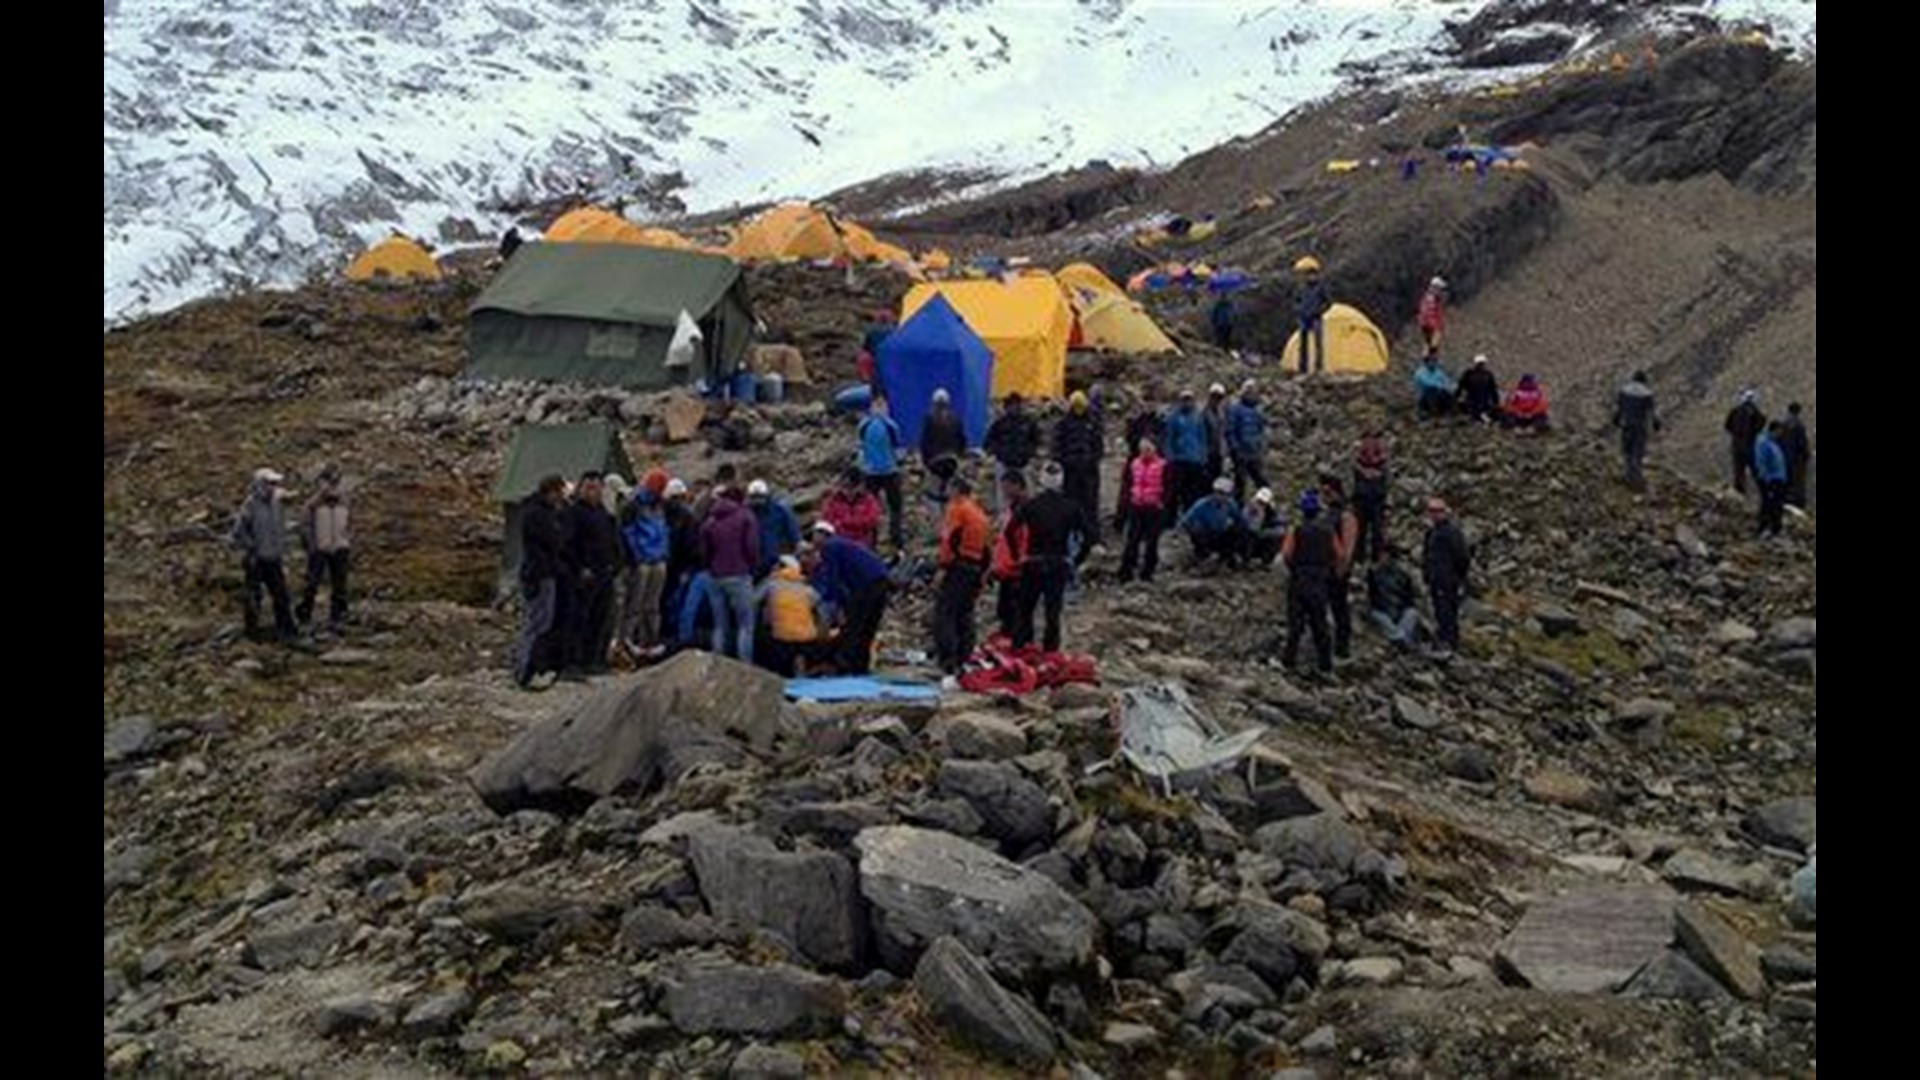 Nepal avalanche hit climbers as they were sleeping